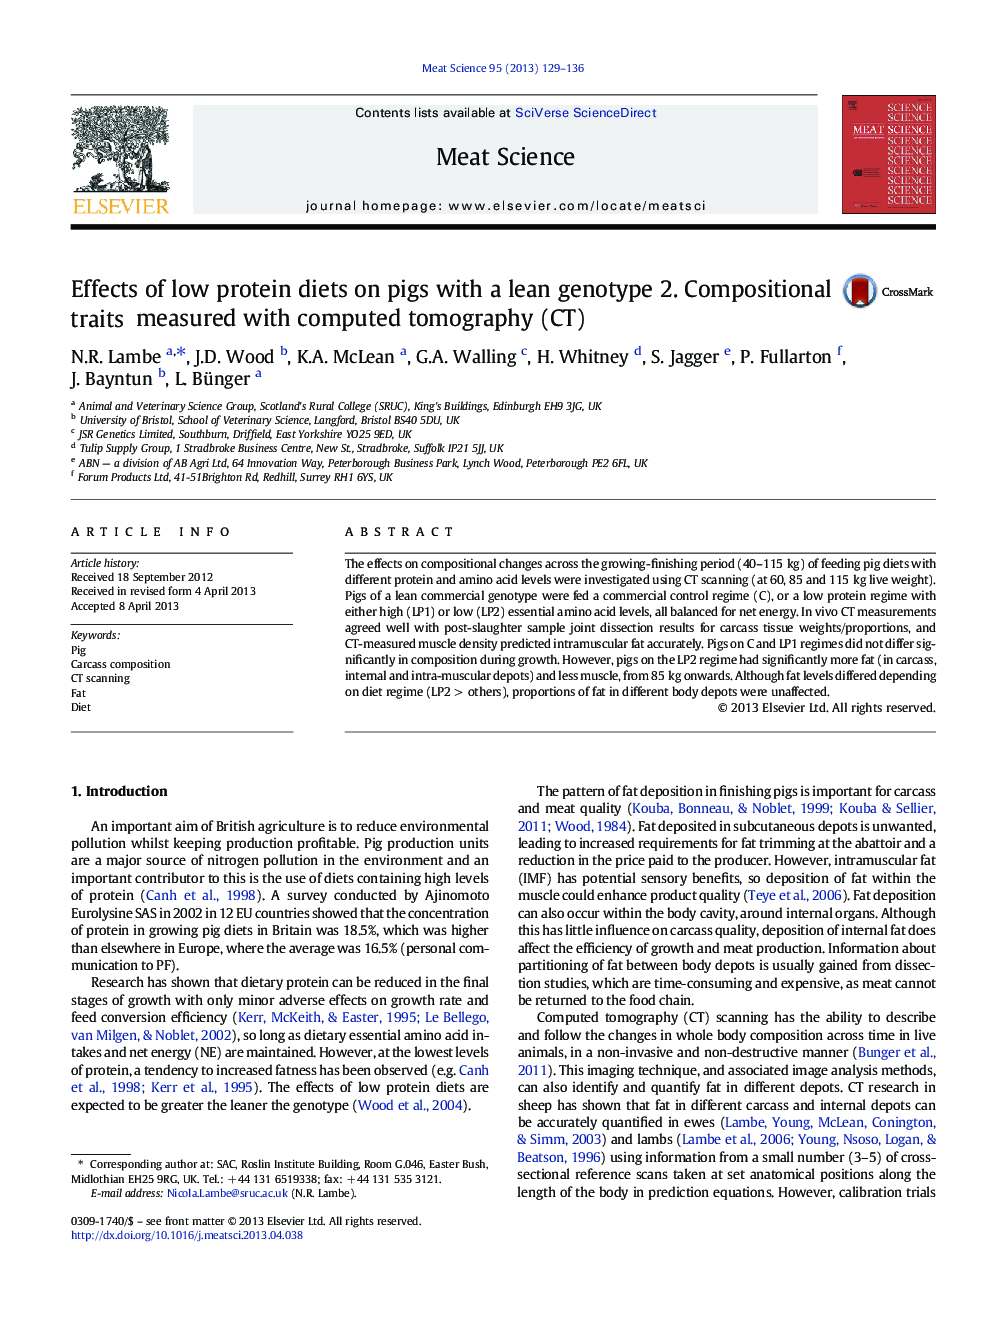 Effects of low protein diets on pigs with a lean genotype 2. Compositional traits measured with computed tomography (CT)